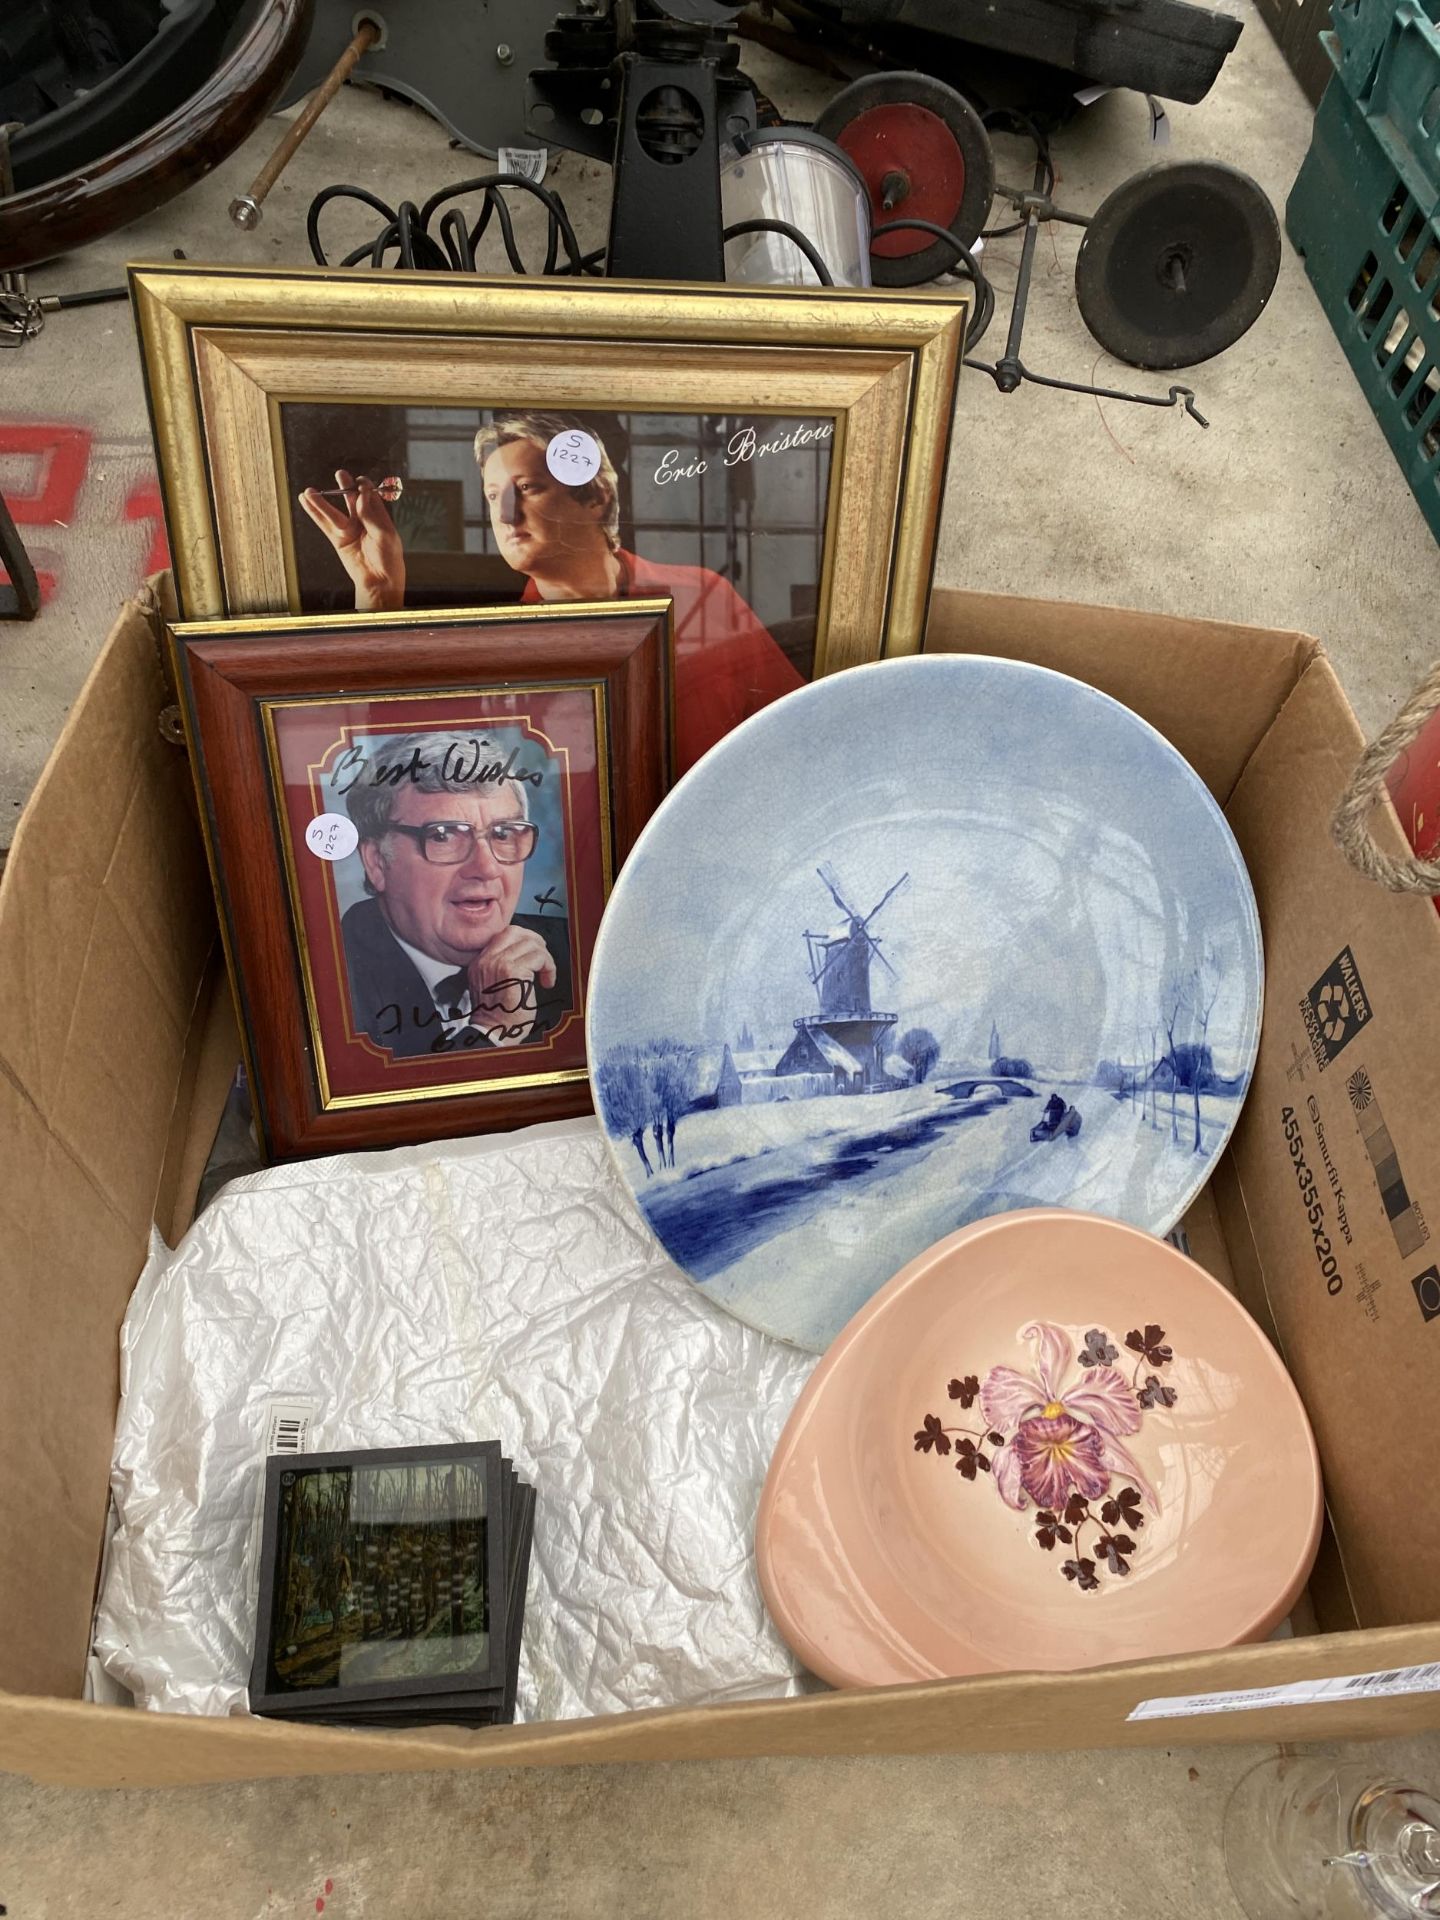 AN ASSORTMENT OF ITEMS TO INCLUDE GLASS AND CERAMIC ITEMS, A LAUNDRY BIN AND FRAMED PRINTS ETC - Image 4 of 4